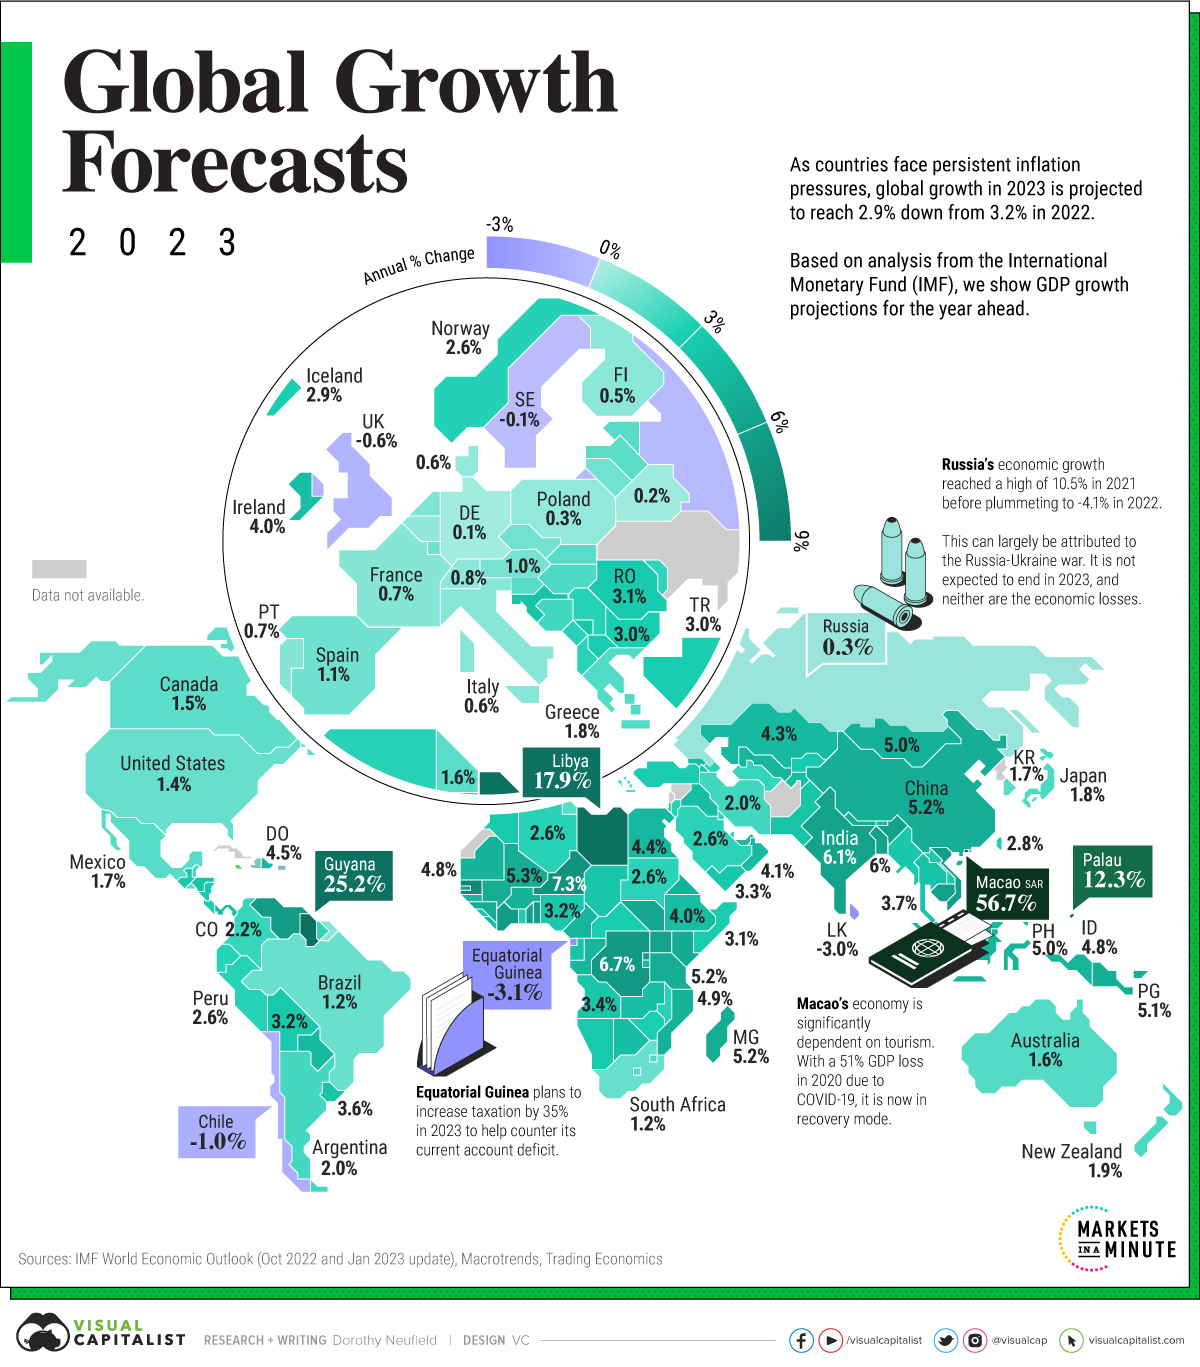 GDP Growth Forecasts by Country, in 2023